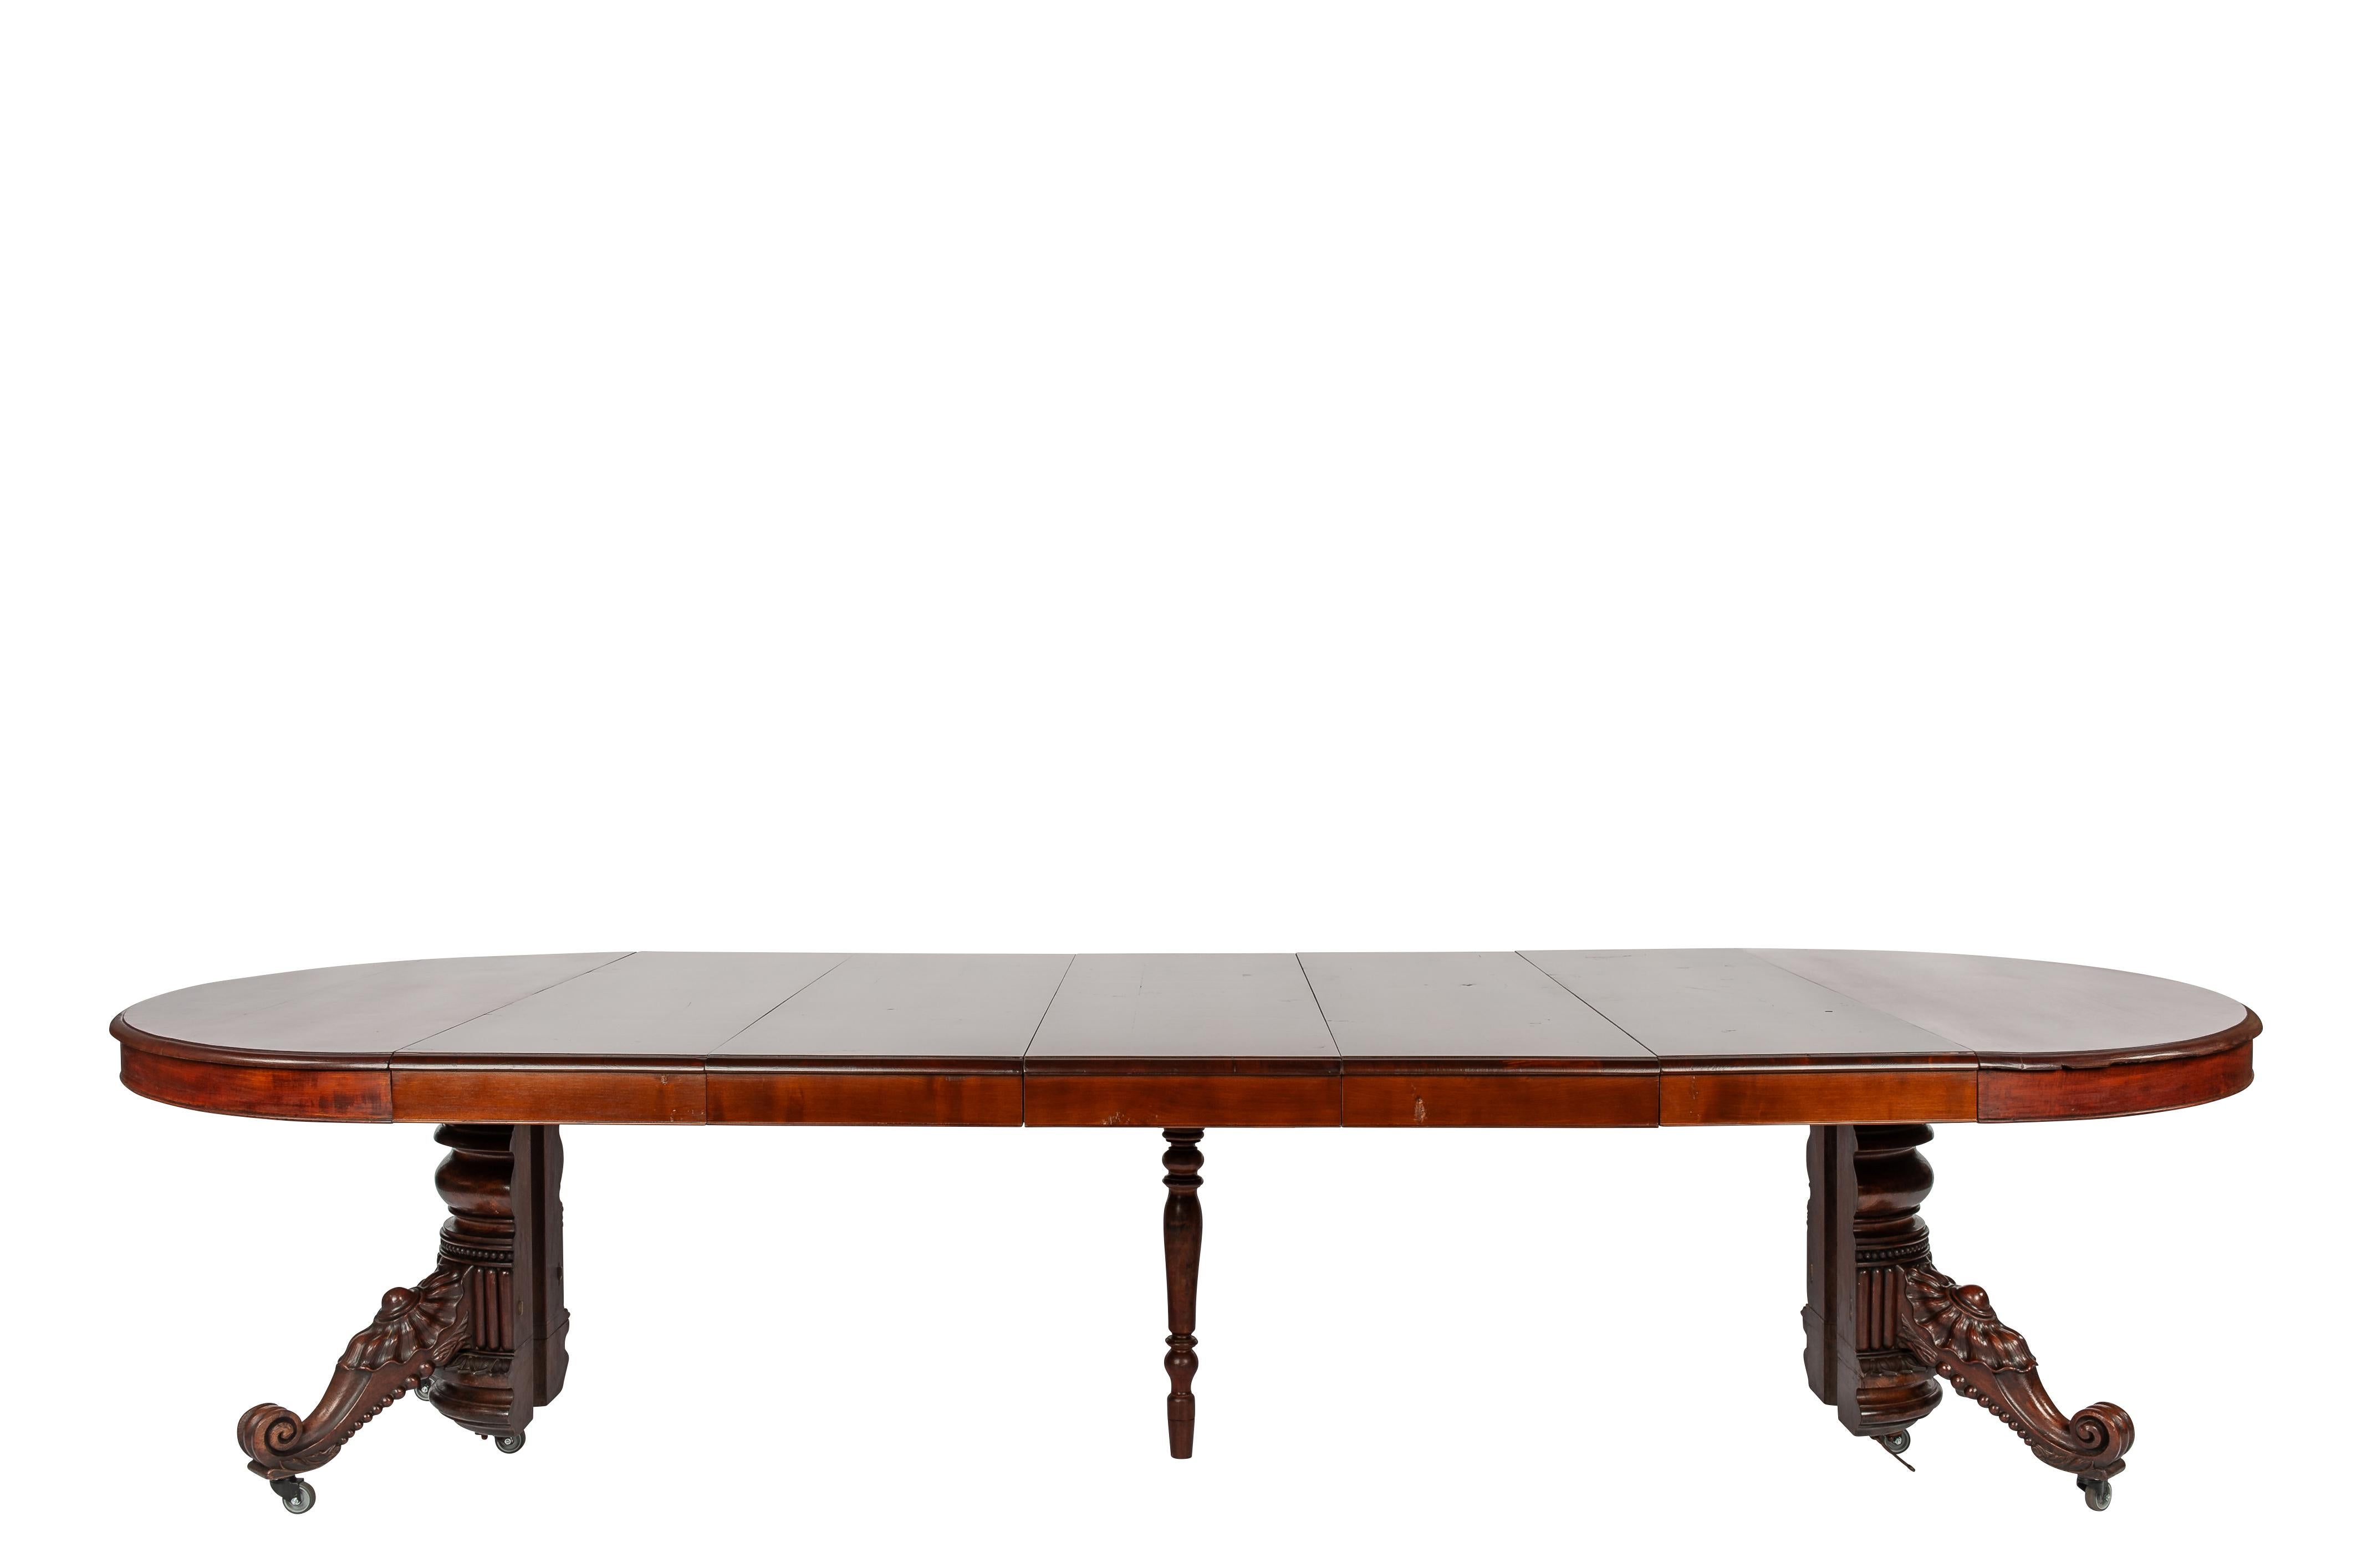 Carved Antique 19th-century oval extendible French warm brown mahogany dining table. For Sale